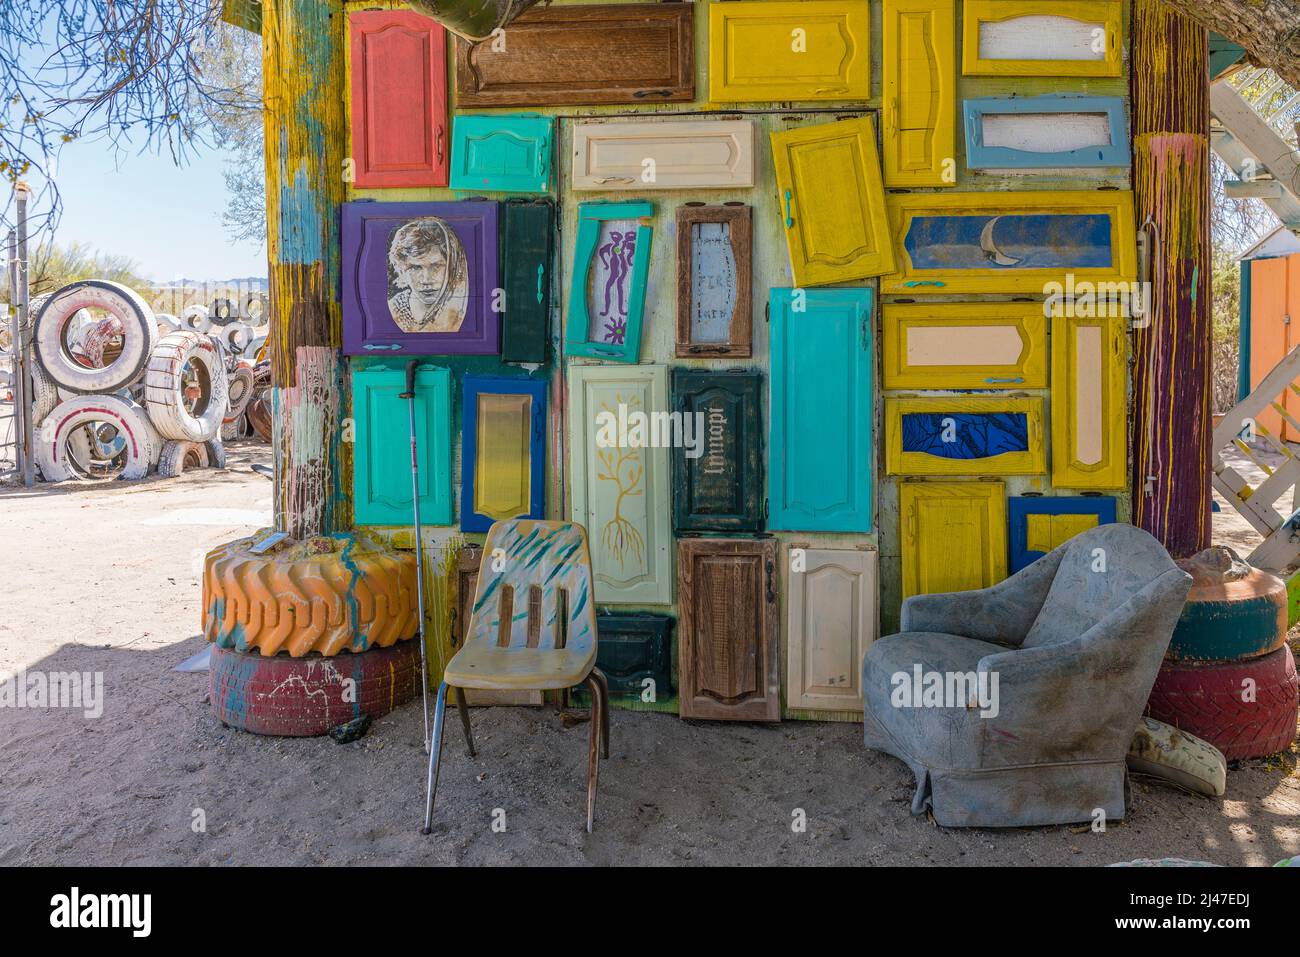 A decorated small building with painted cabinet doors and chairs in the settlement of East Jesus, California. Stock Photo